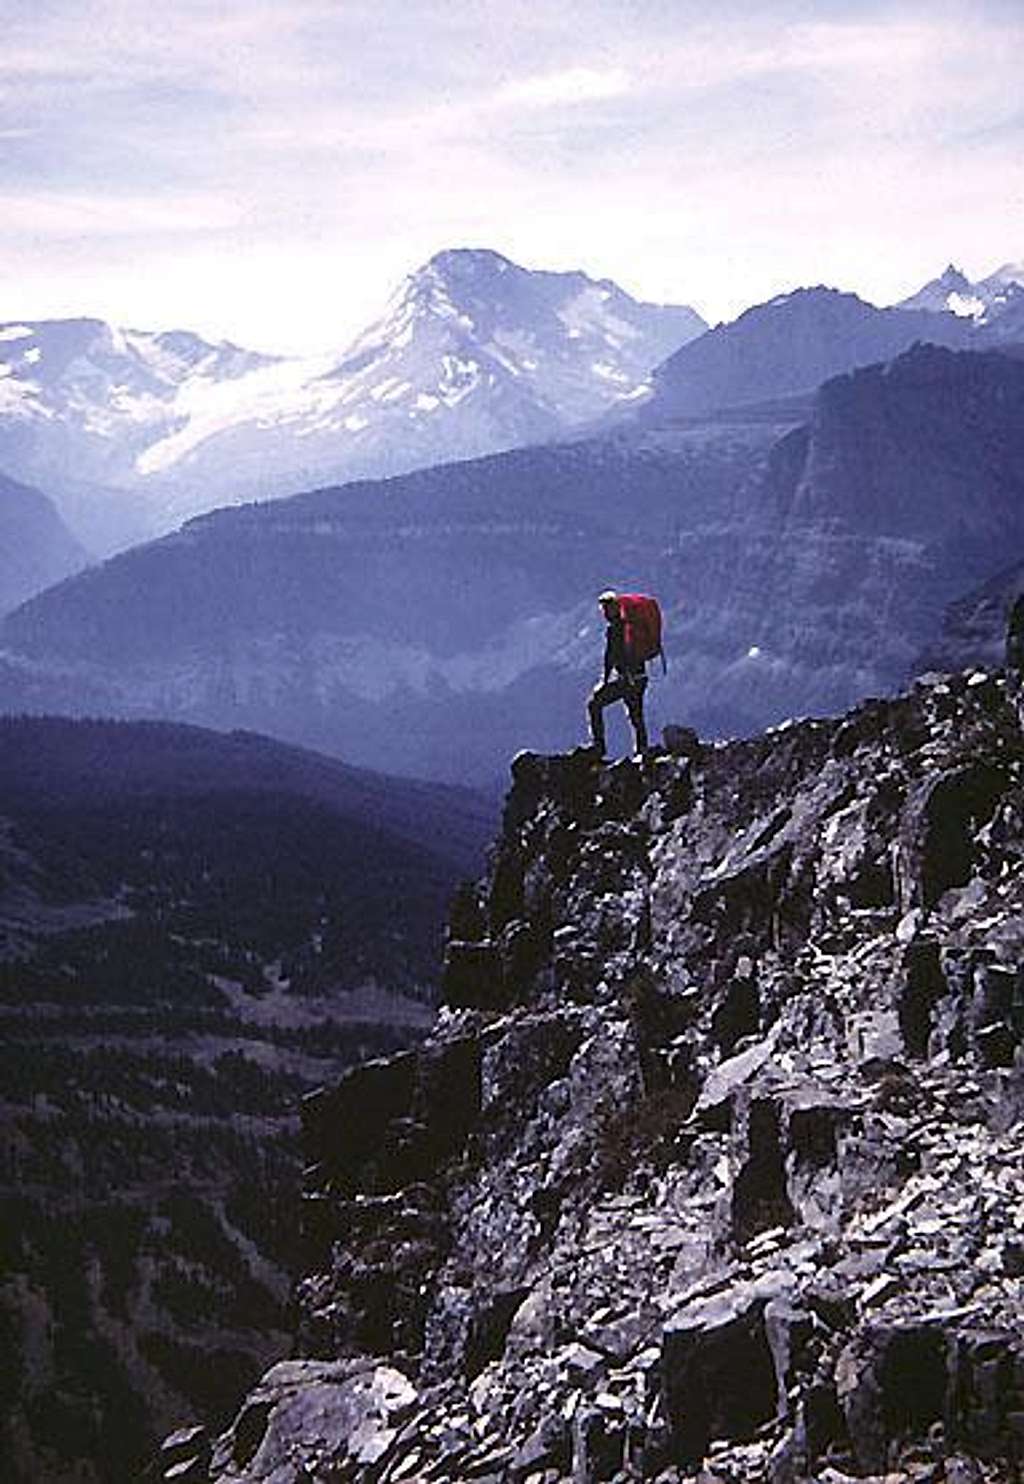 Top of the diorite diorite sill<br> South Slope Route Mount Siyeh